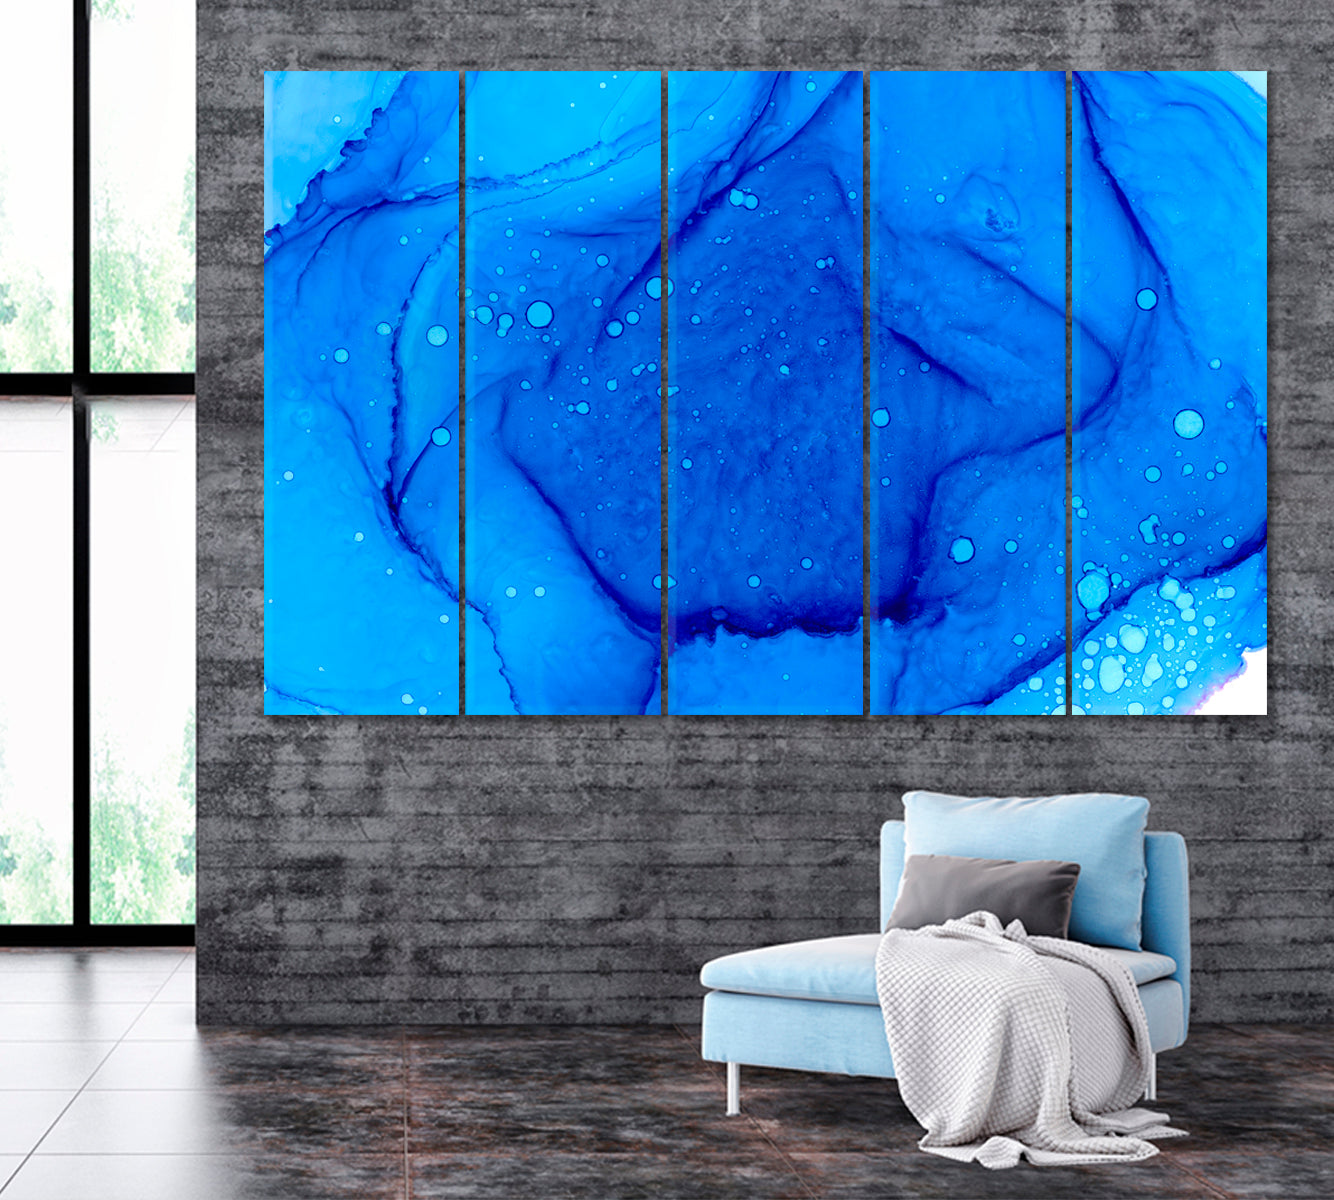 Abstract Blue Watercolor Splashes and Drops Canvas Print ArtLexy 5 Panels 36"x24" inches 